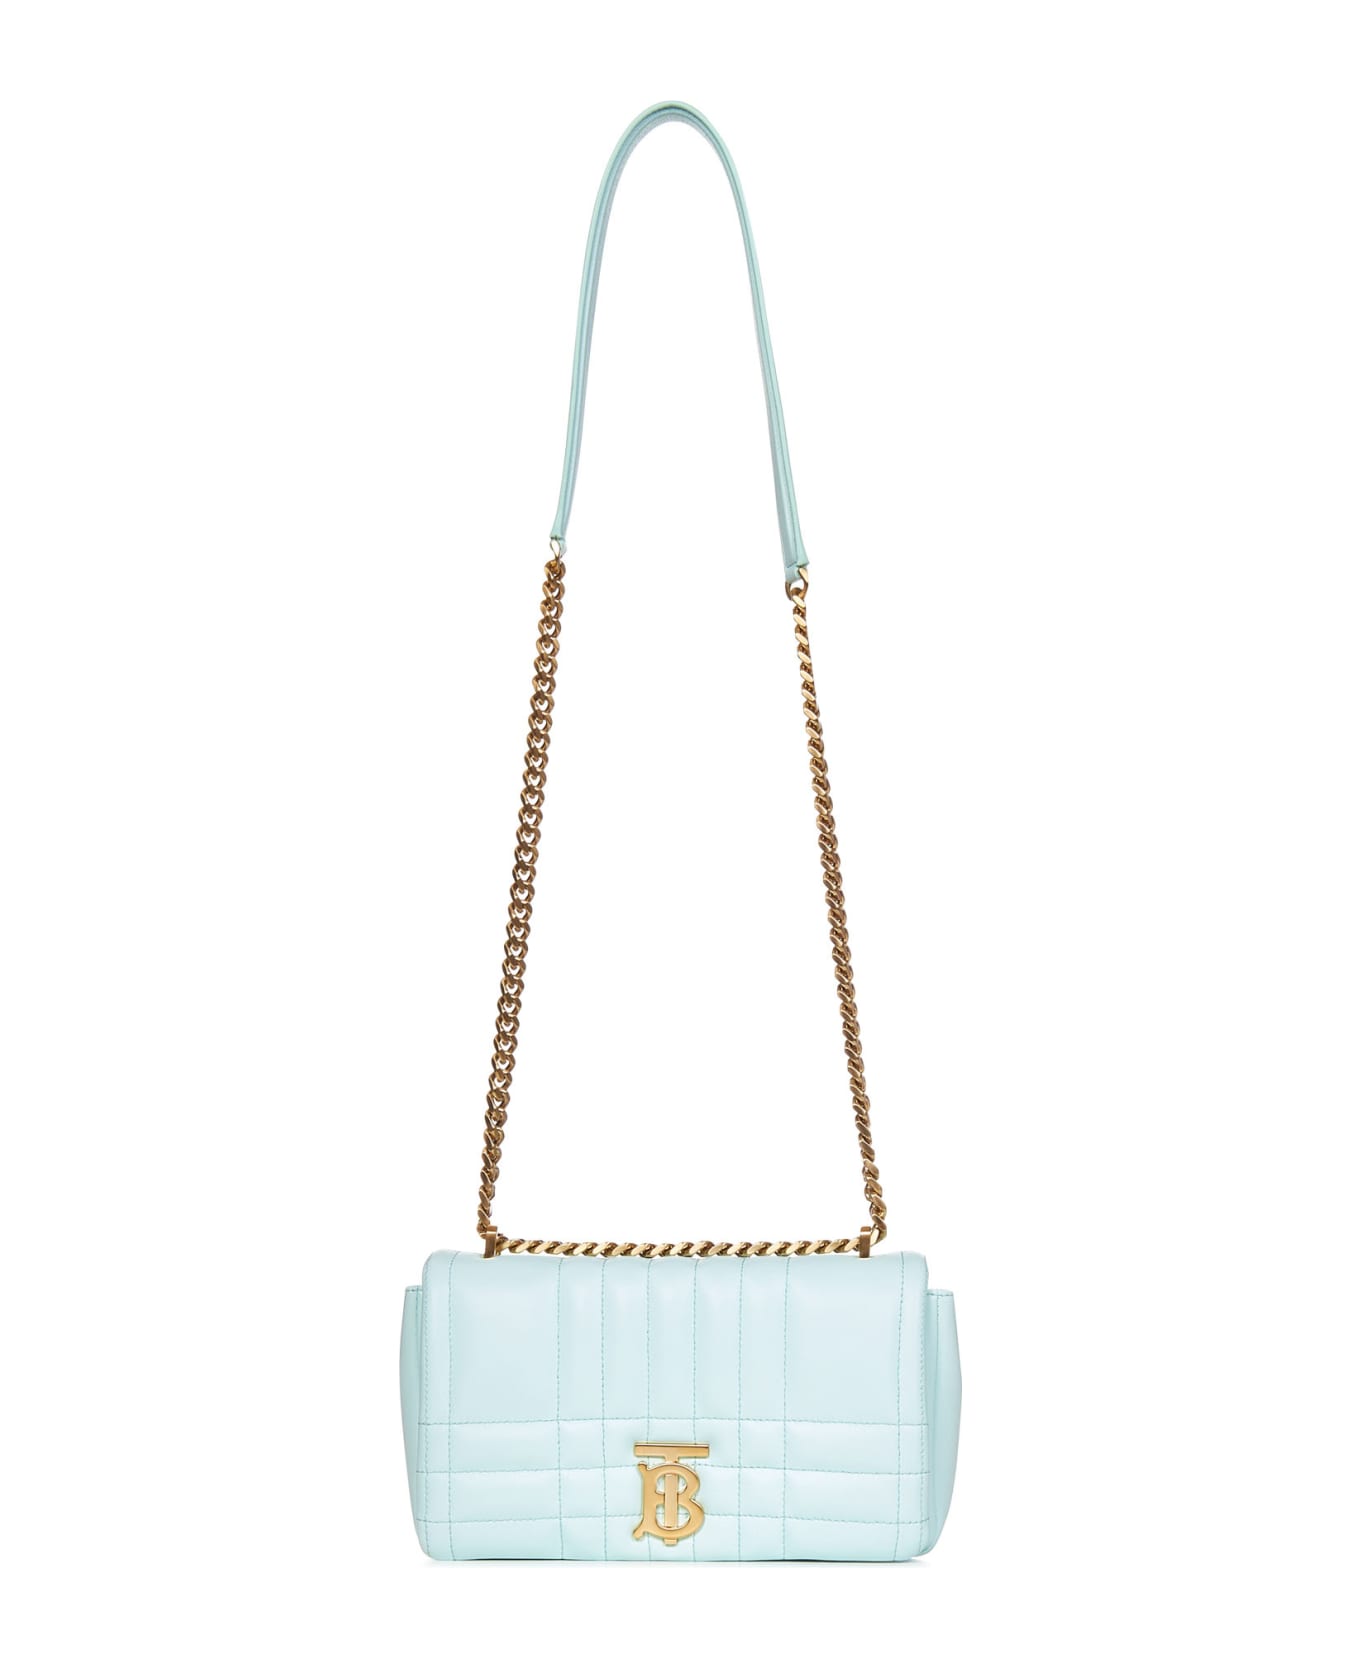 Burberry Lola Small Shoulder Bag - Clear Blue